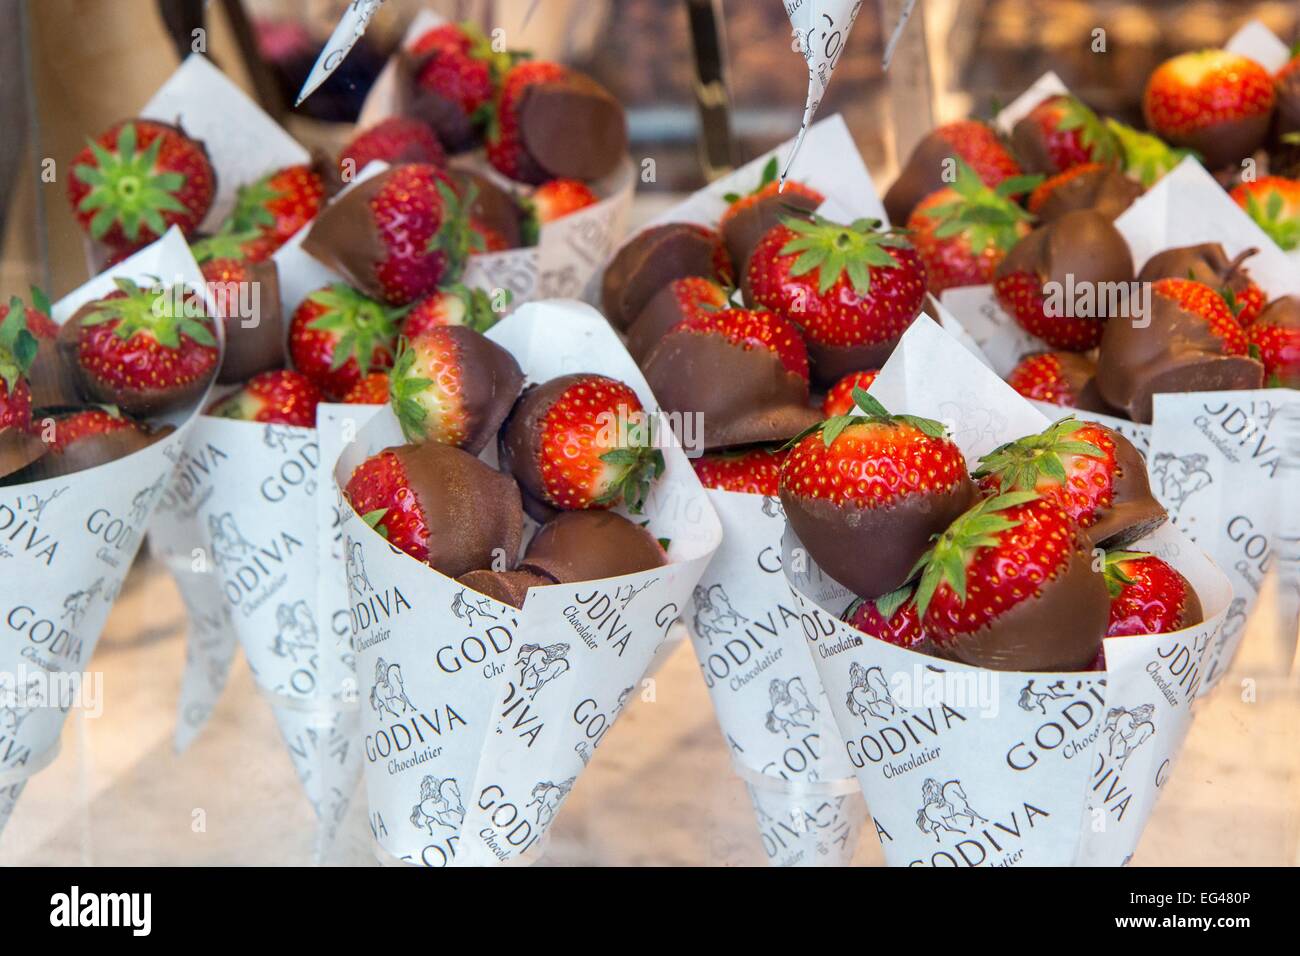 Belgium: Strawberries glazed with chocolate in confectionery shop in Bruges. Photo from 30 August 2014. Stock Photo